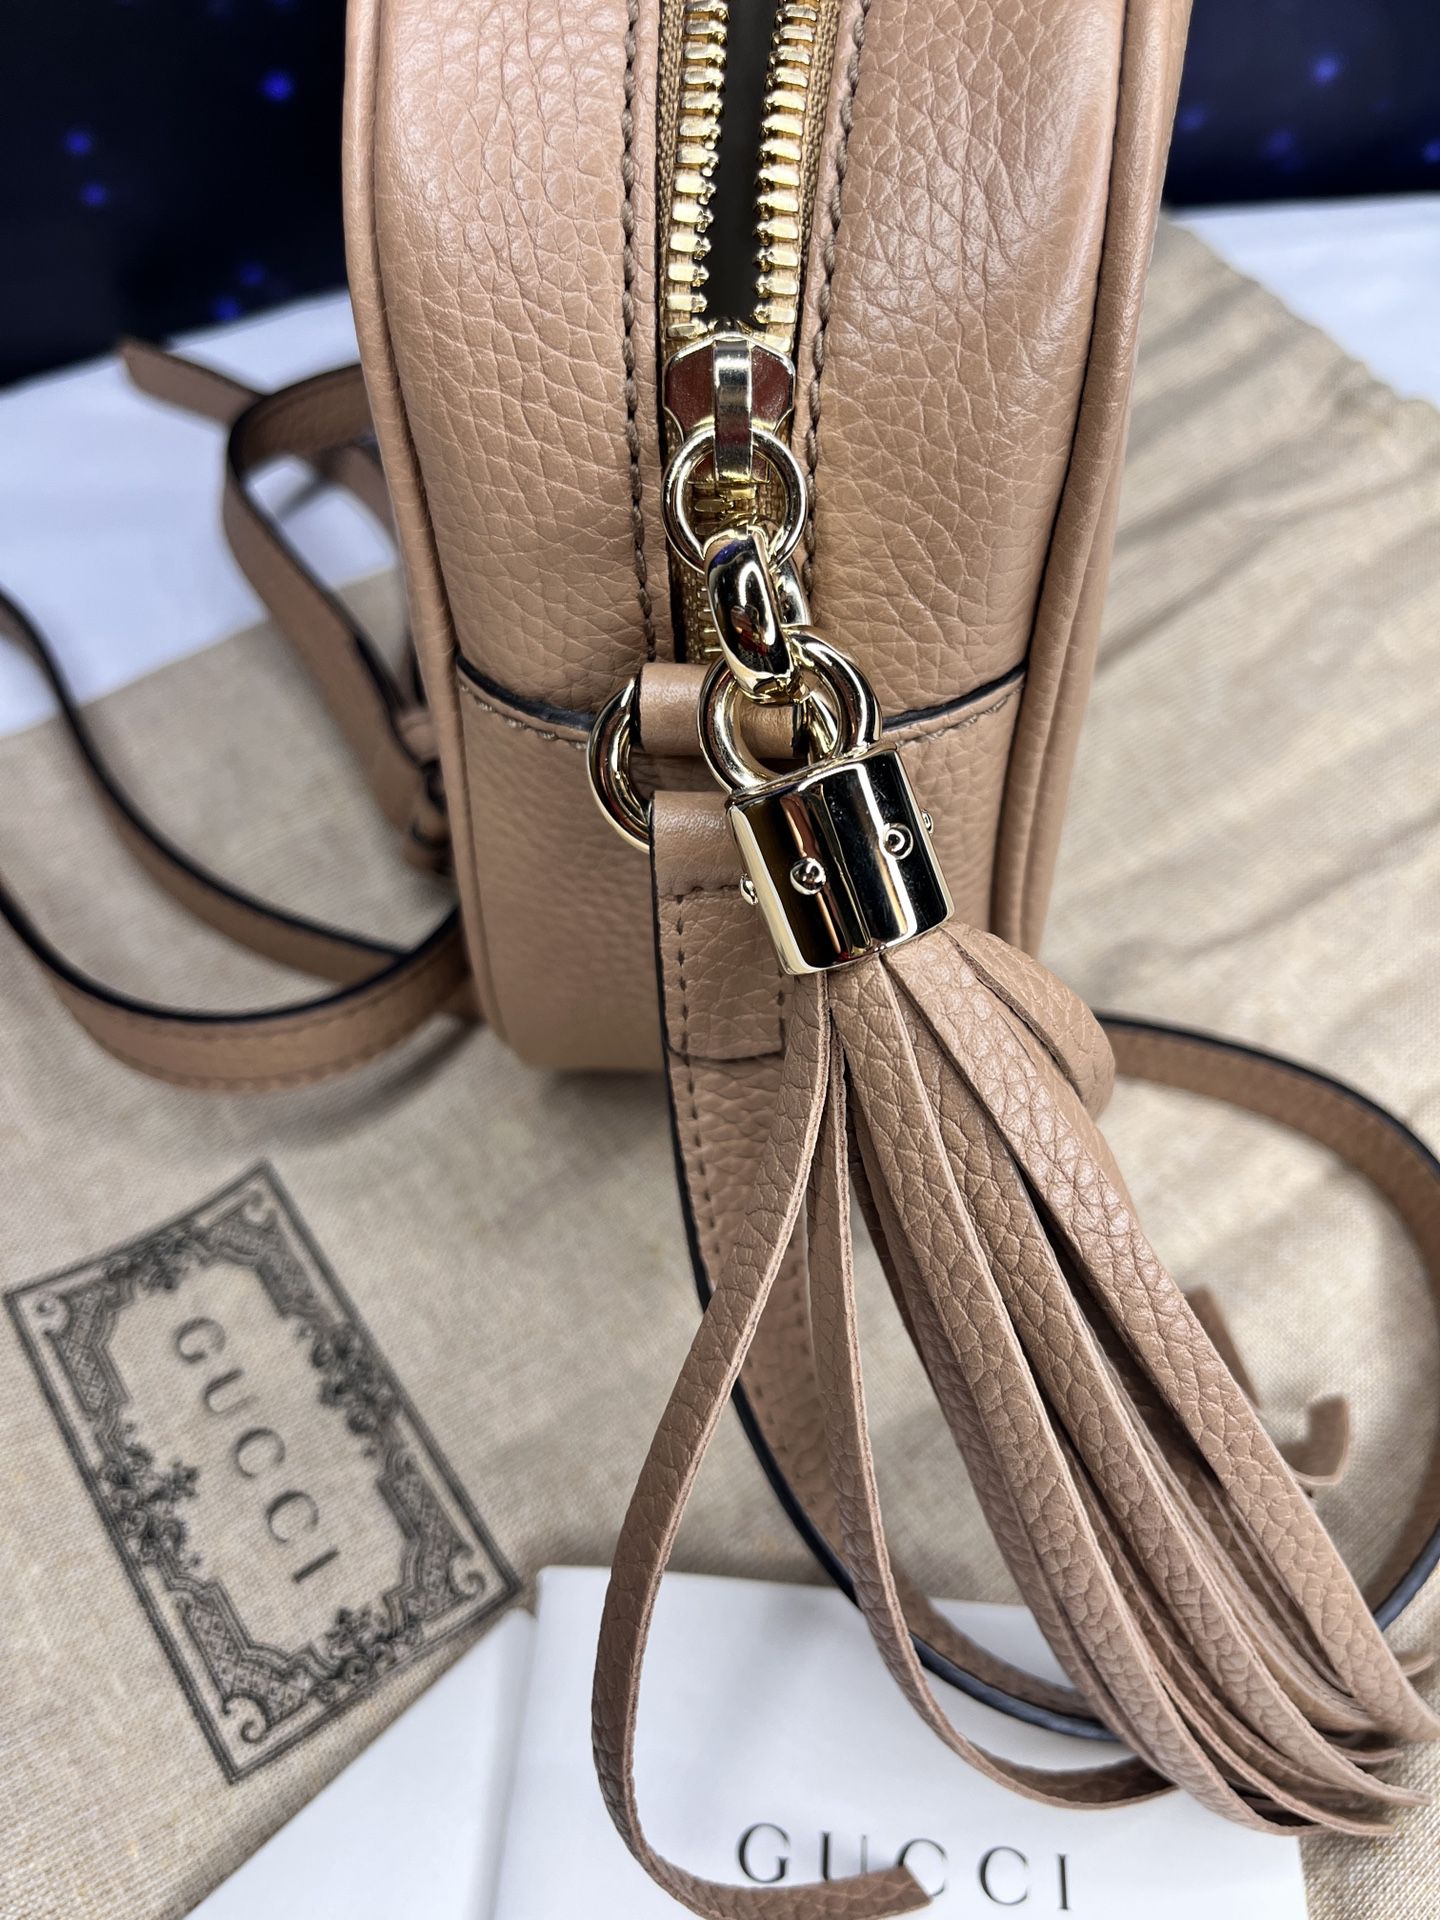 Large Gucci Tote Bag for Sale in Troutdale, OR - OfferUp